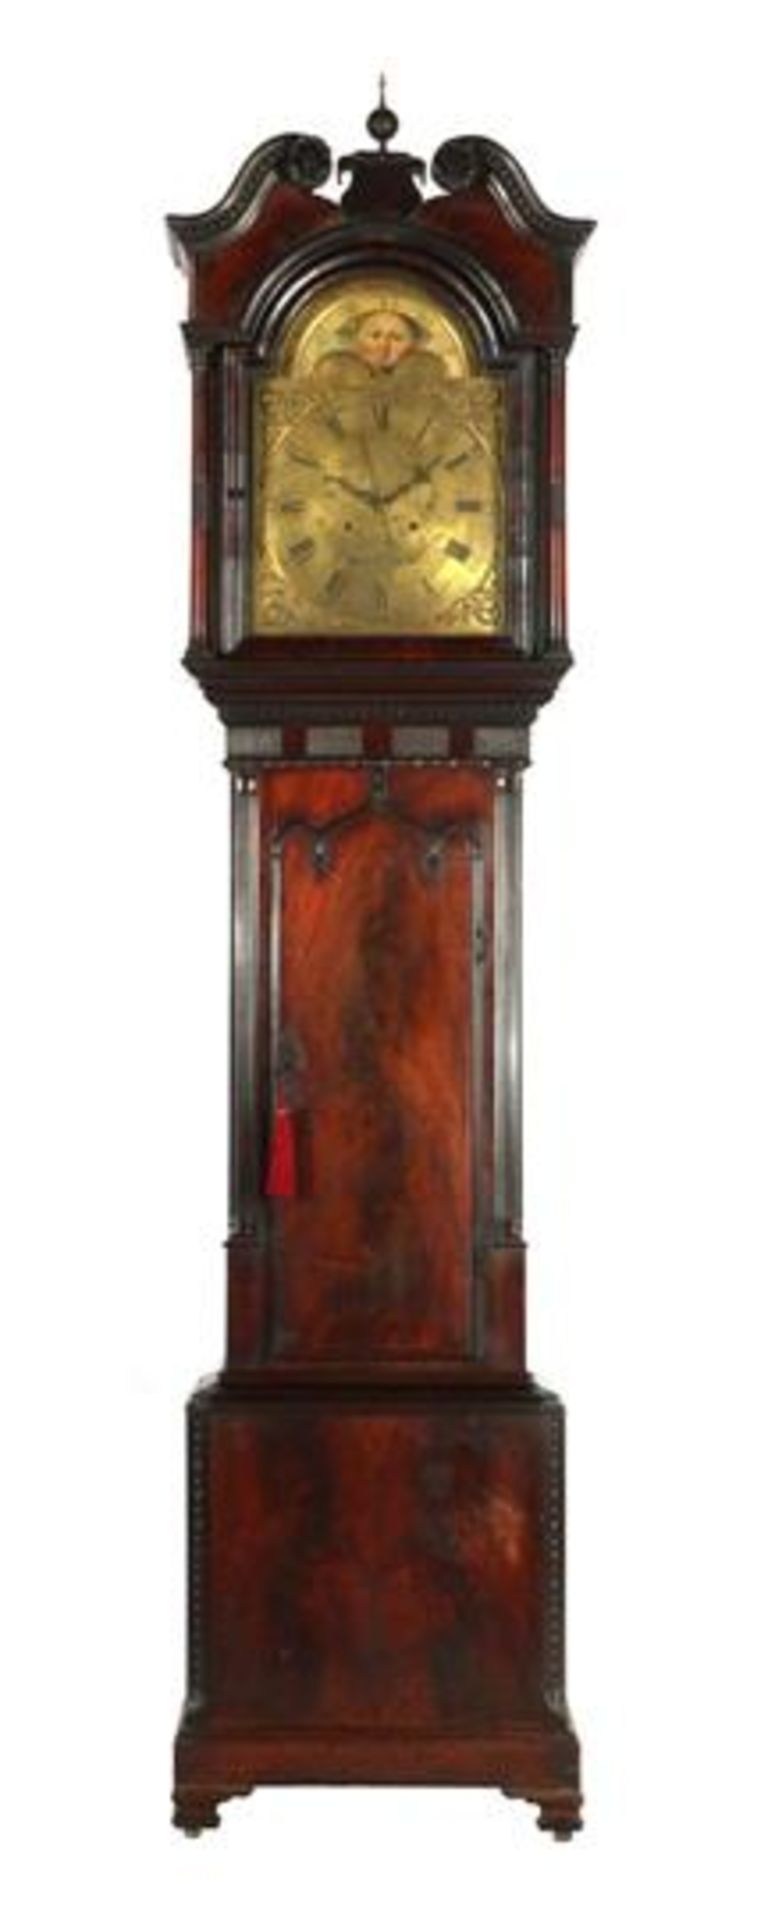 Standing watch with moon phase movement, marked William Kirk Stockport, in rich mahogany veneer case